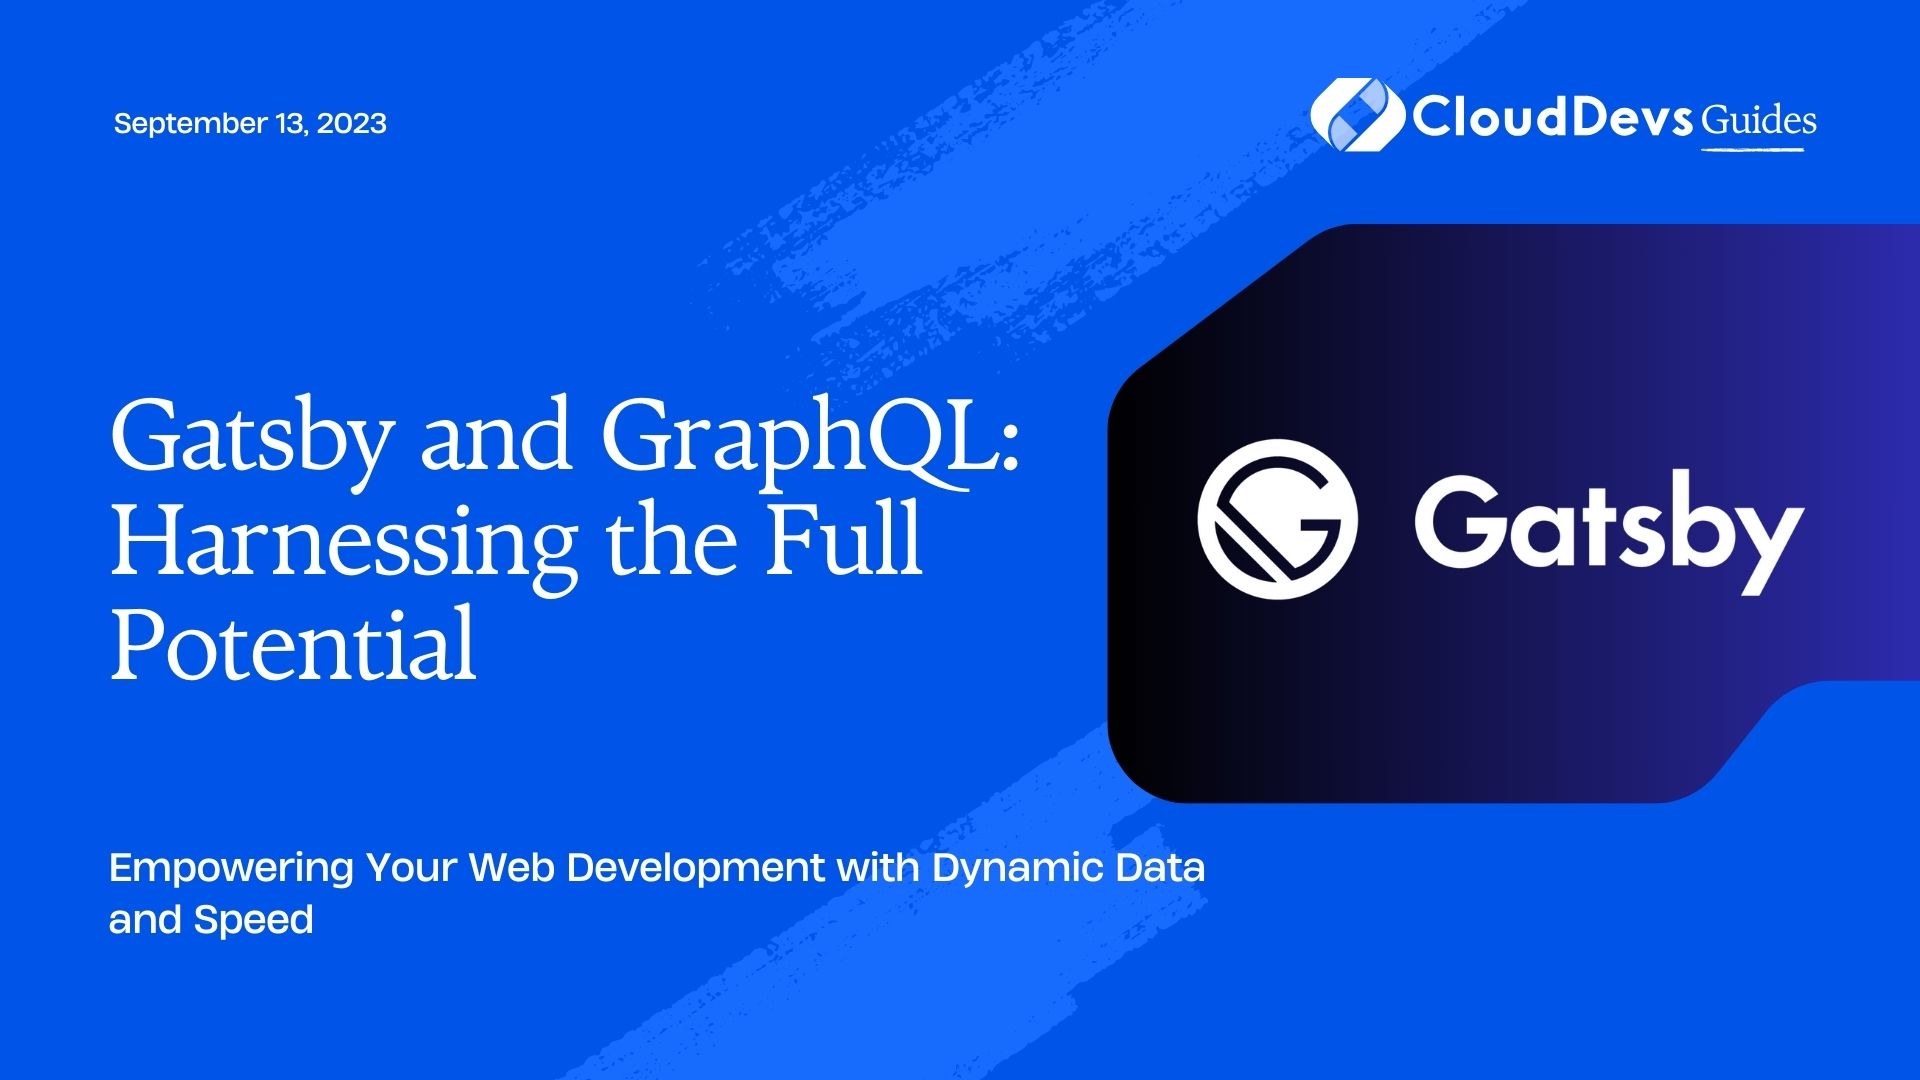 Gatsby and GraphQL: Harnessing the Full Potential